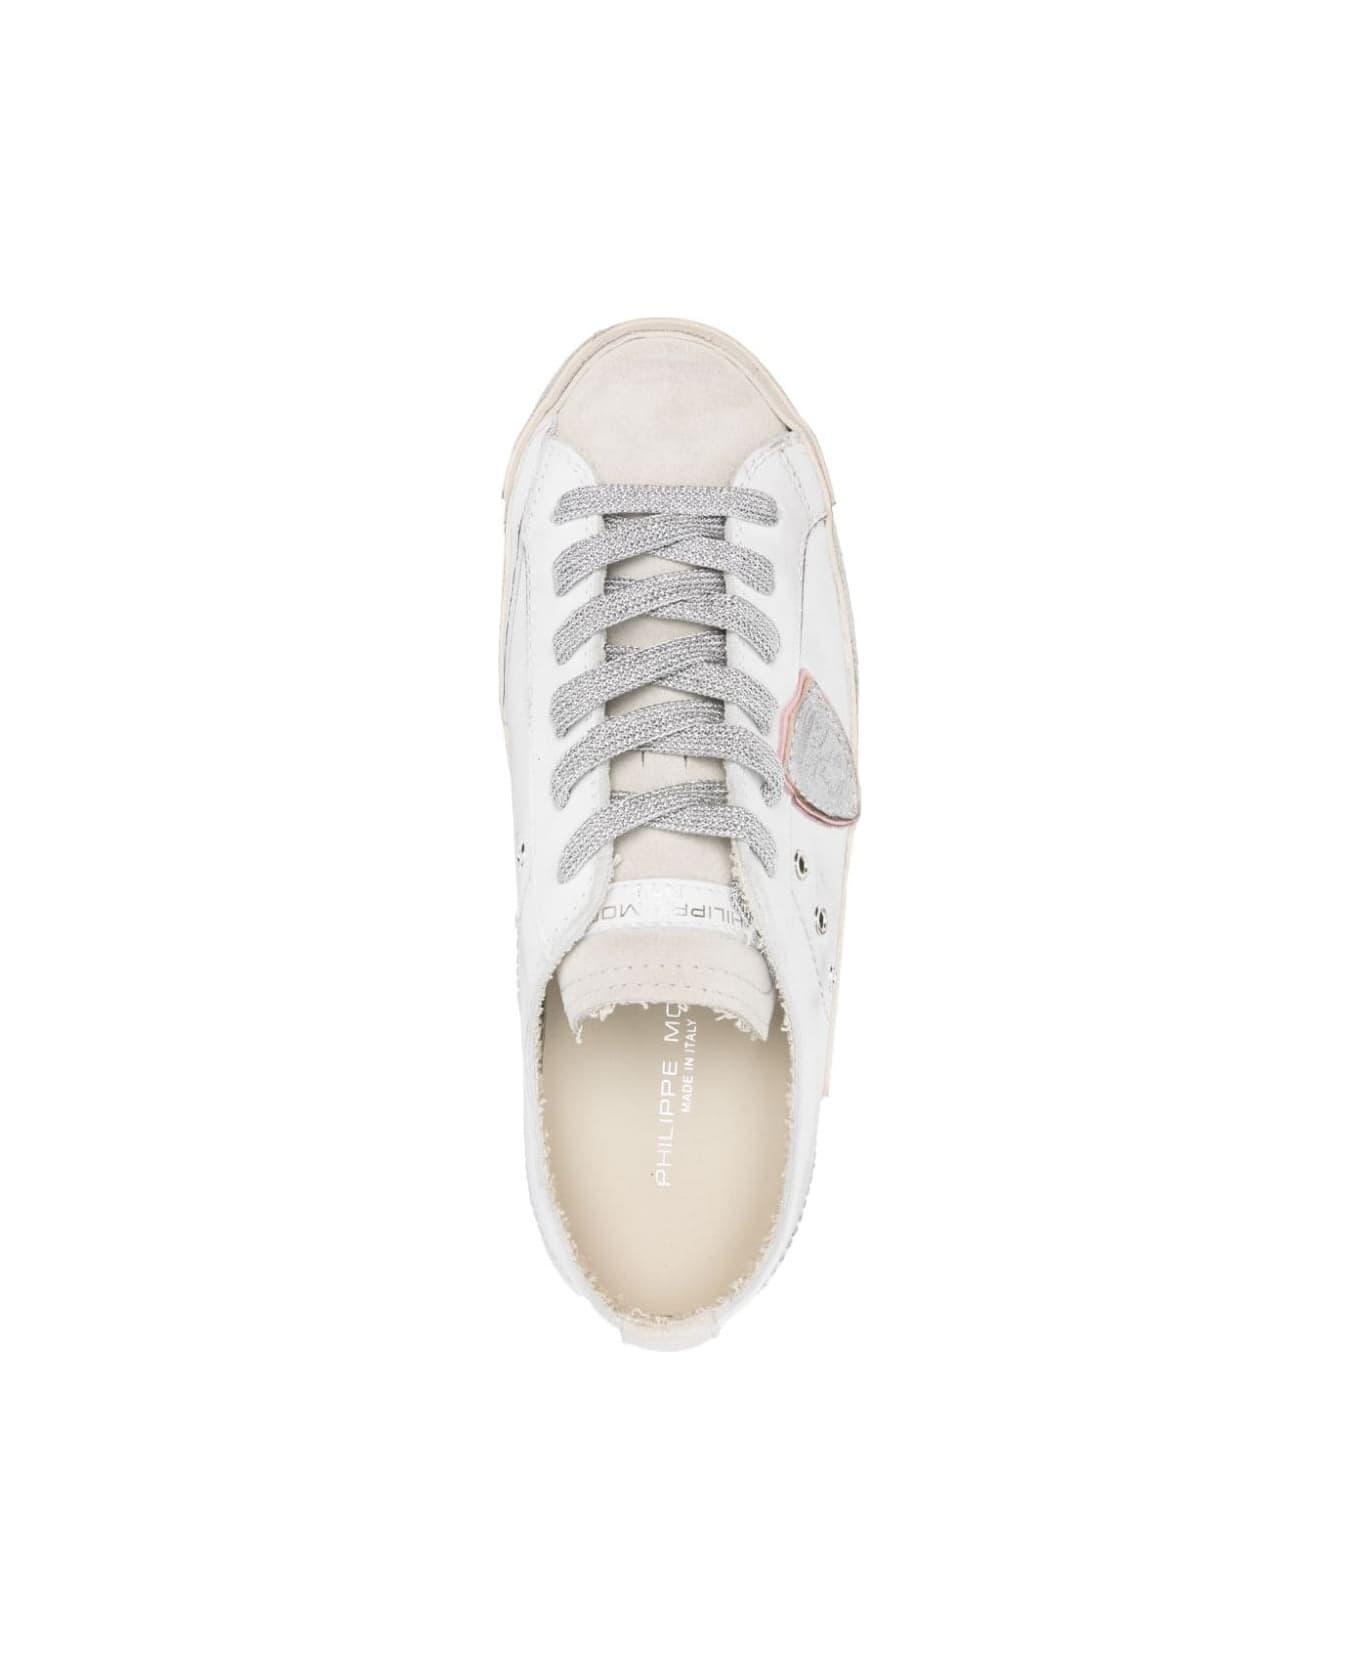 Philippe Model Prsx Low Sneakers - White - White スニーカー